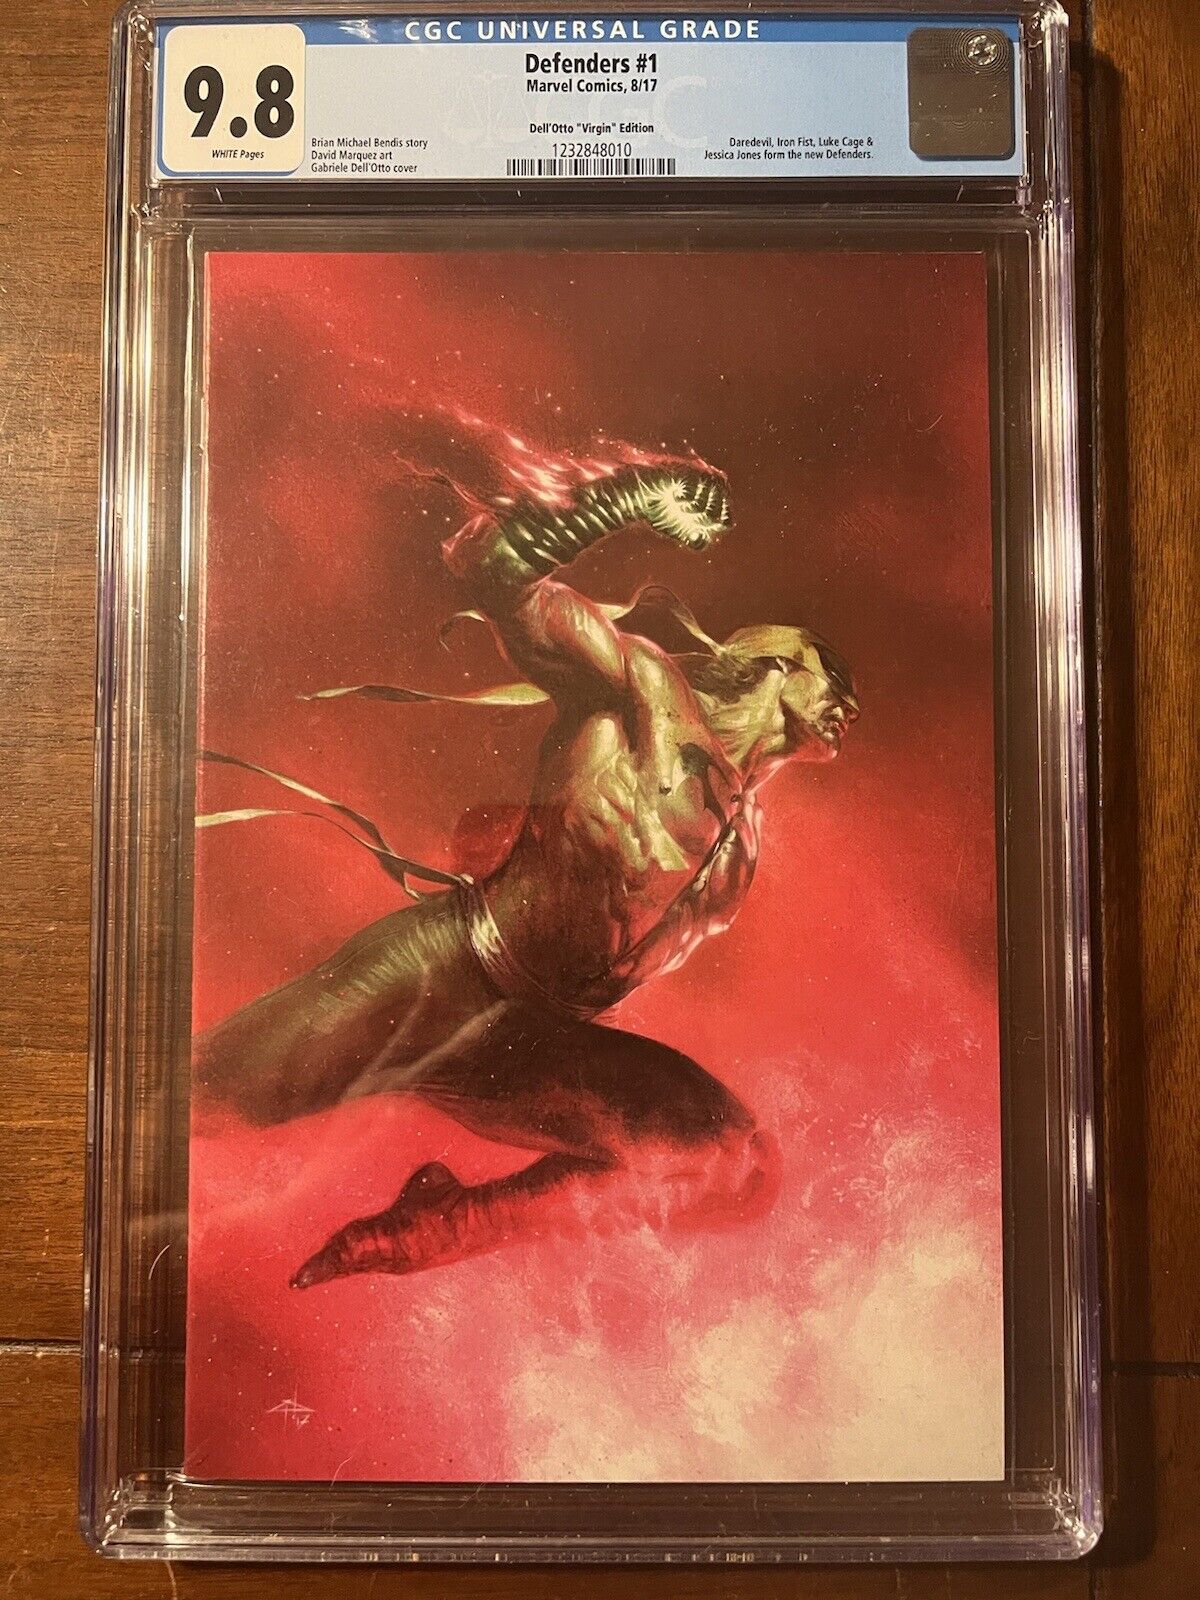 DEFENDERS #1 8/17 CGC 9.8 DELL OTTO VIRGIN VARIANT EXITION NICE